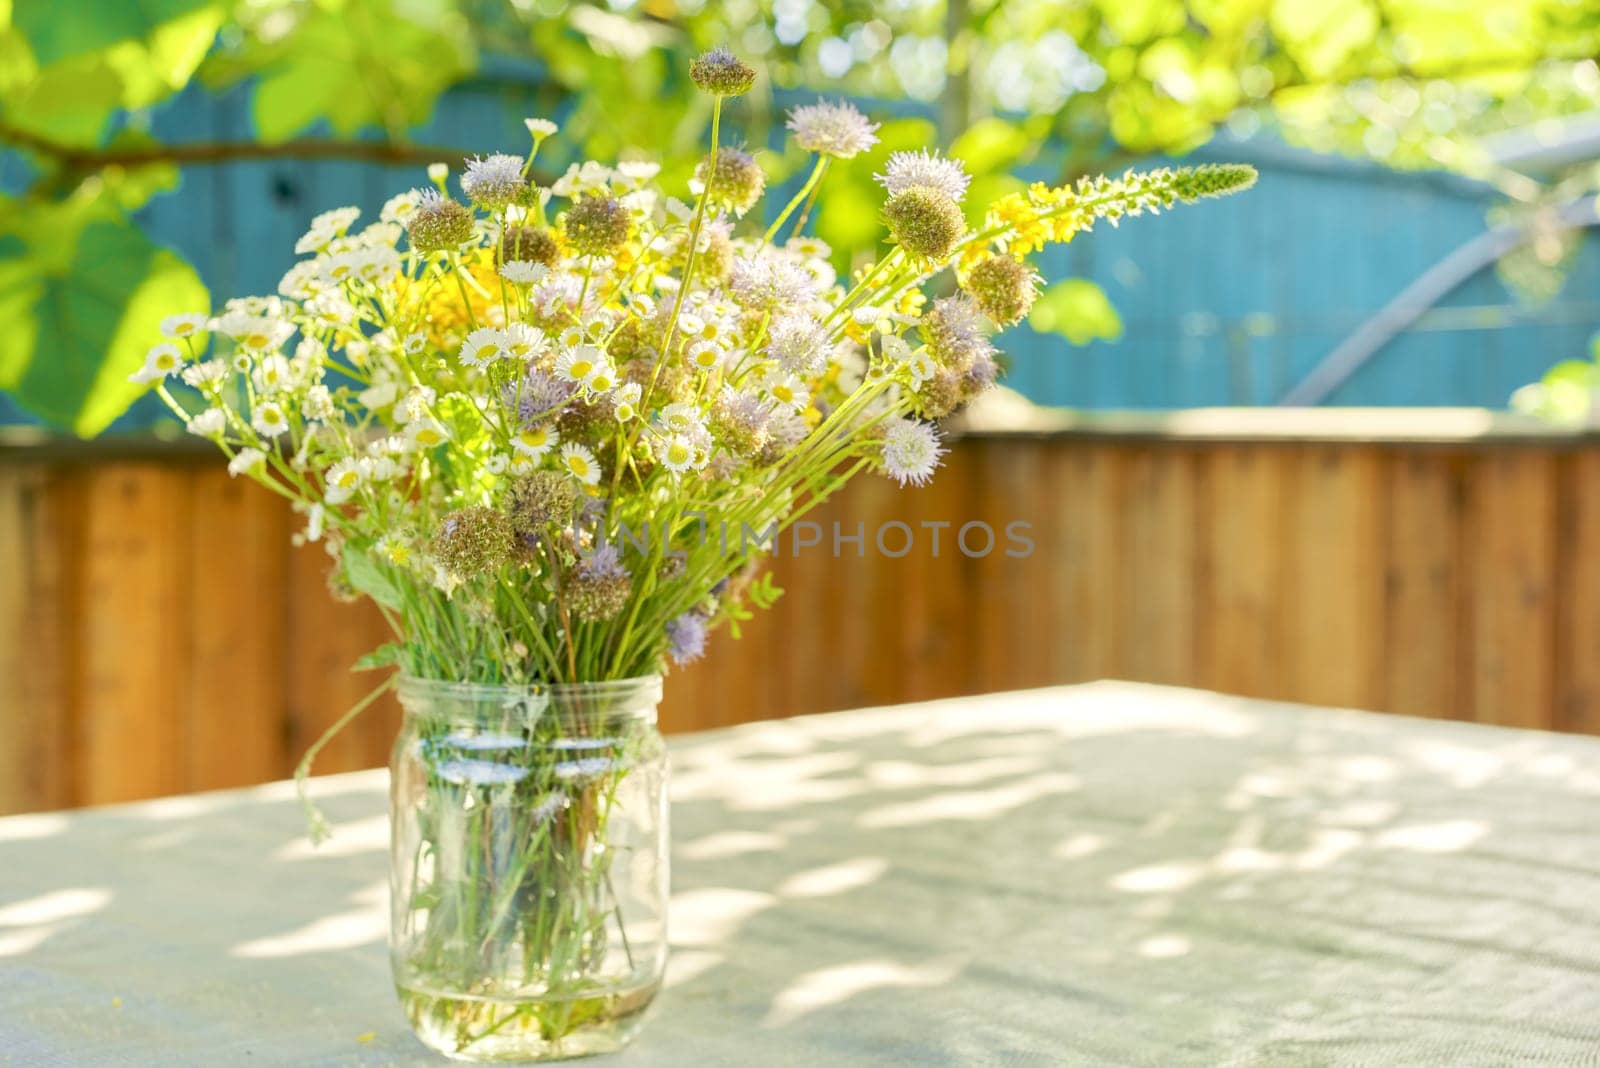 Bouquet of summer wildflowers and herbs in jar on table on terrace, sunny day, rustic style